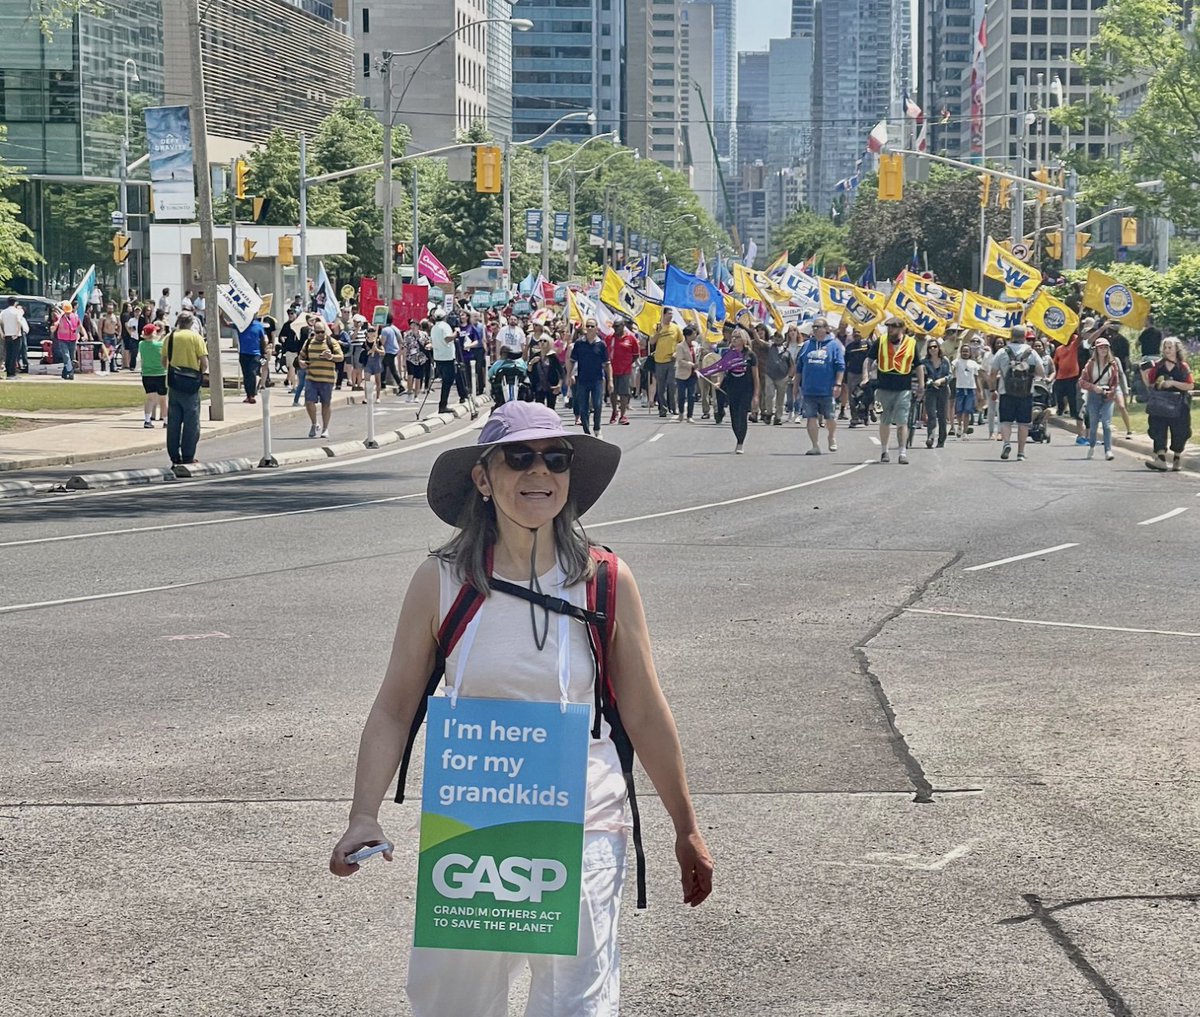 More photos rolling in! The crowds were amazing in #Toronto Fabulous turnout- 10,000 or more on Saturday. Apparently Ford was fuming in QP Park today. The public is pushing back! We want a better future for ALL of our grandkids. #EnoughIsEnoughON